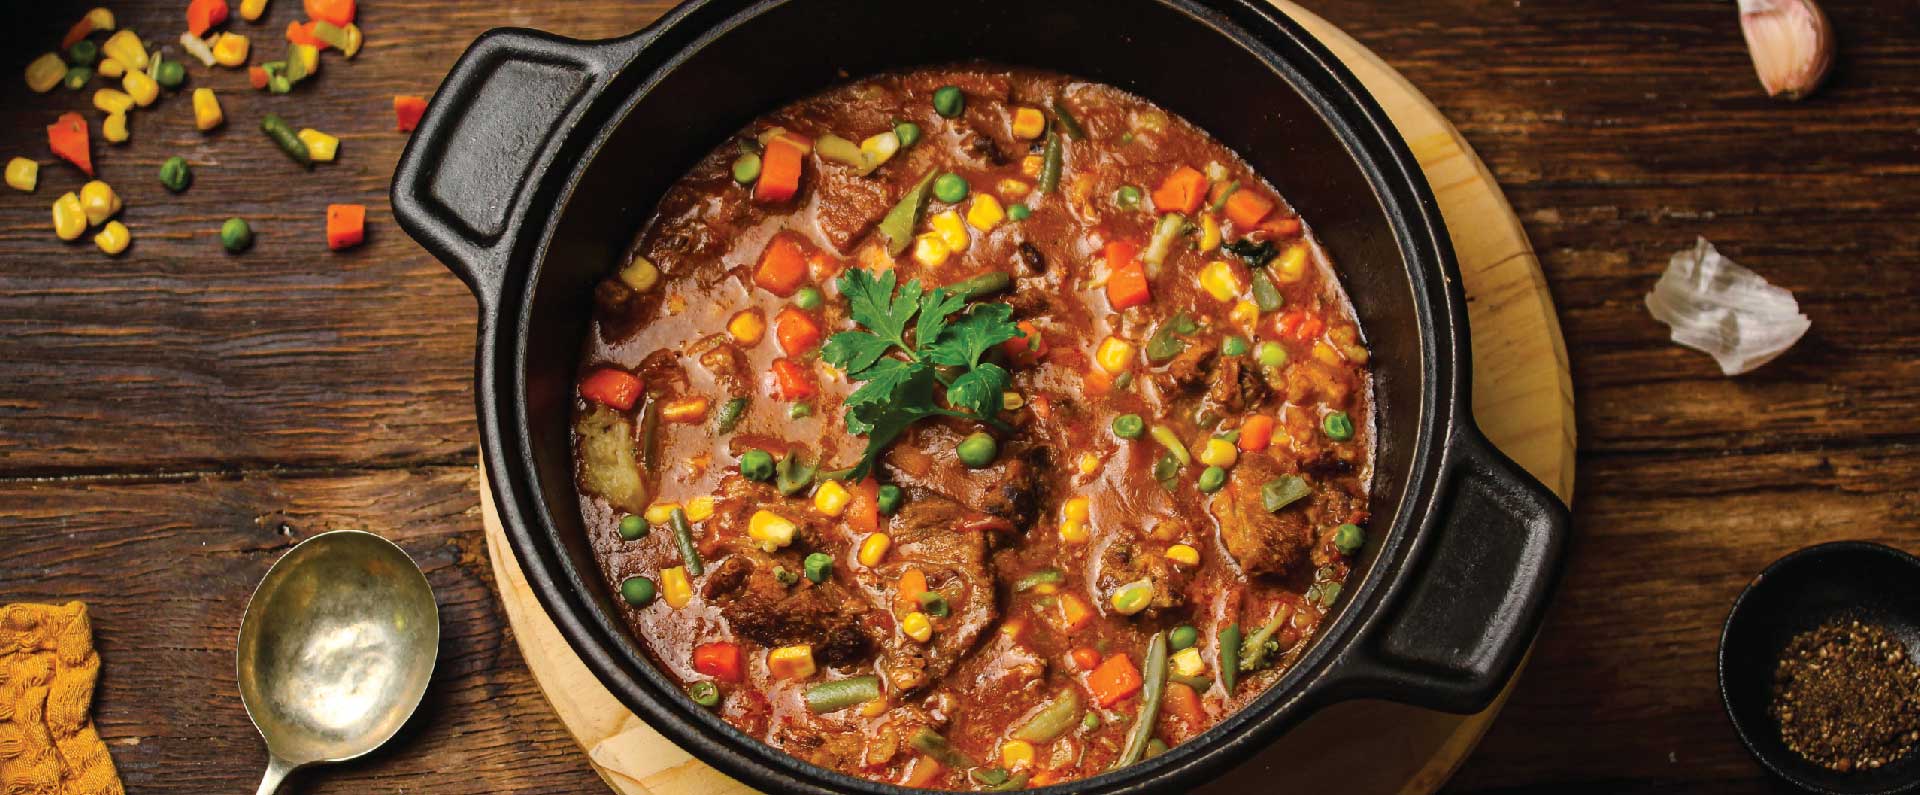 Beef And Veg Stew With McCain Mix Veg